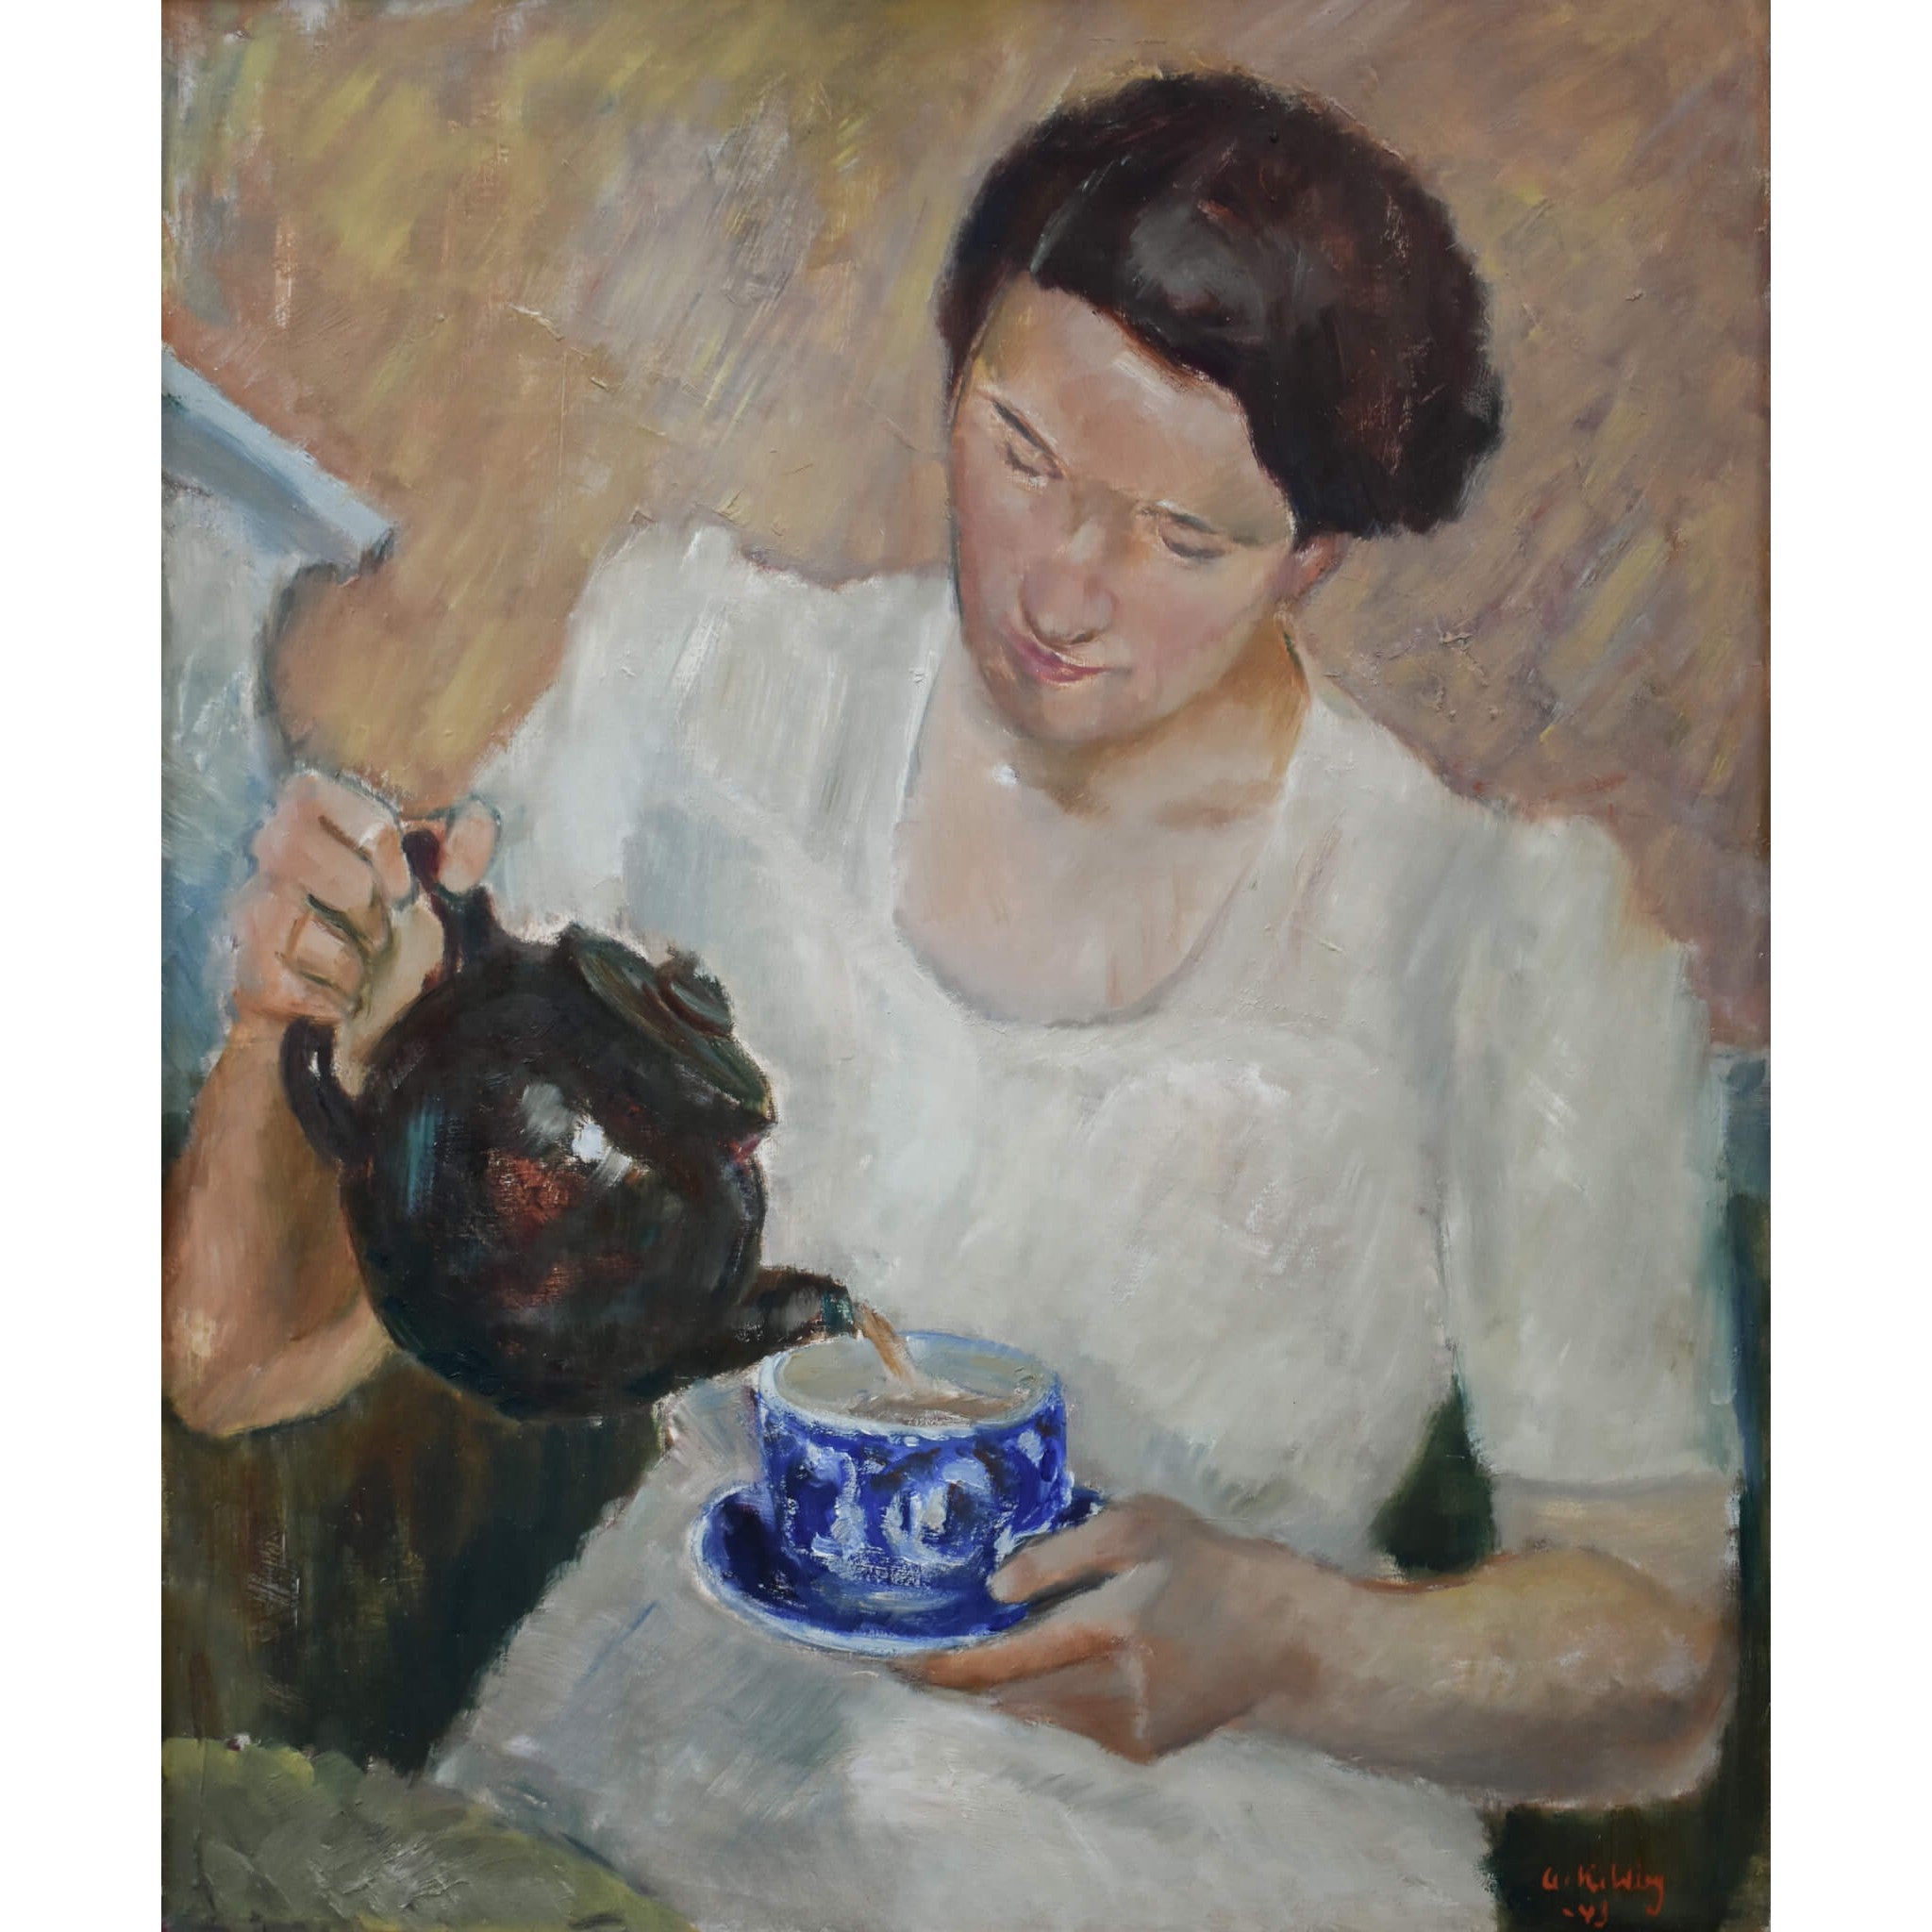 Vintage scene painting by Arne Kilsby depicting a woman gracefully pouring a cup of tea. For sale at Winckelmann Gallery